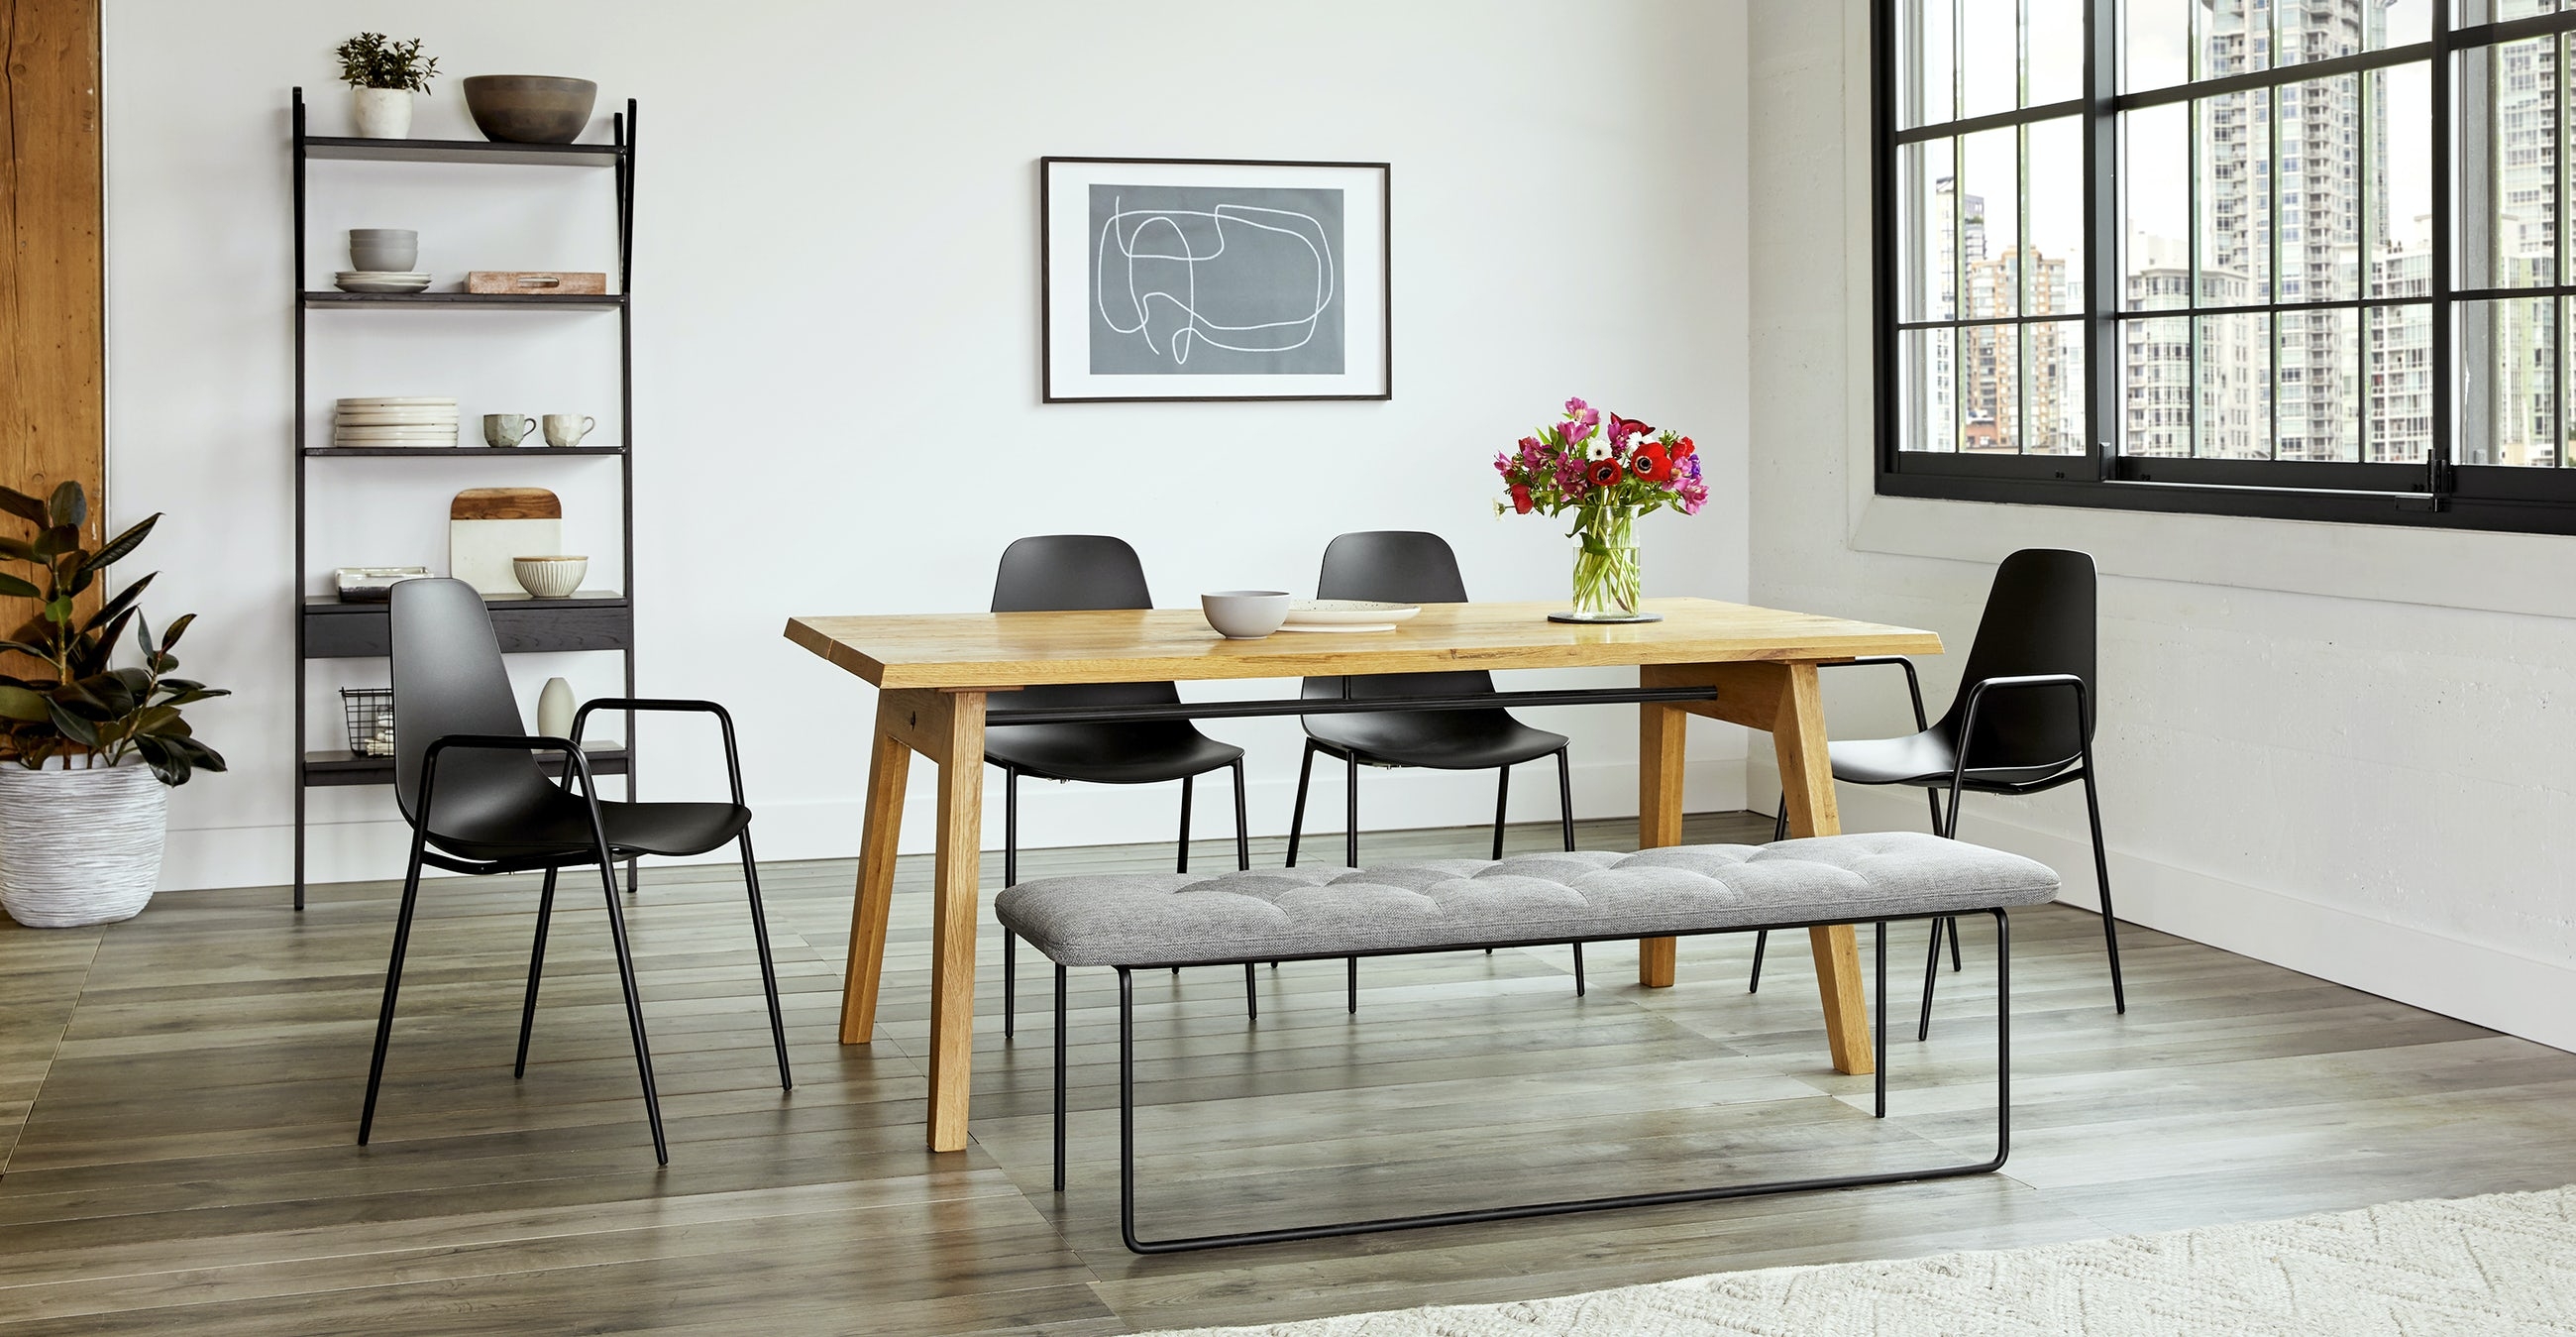 Madera Oak Dining Table For 6 - Image 8